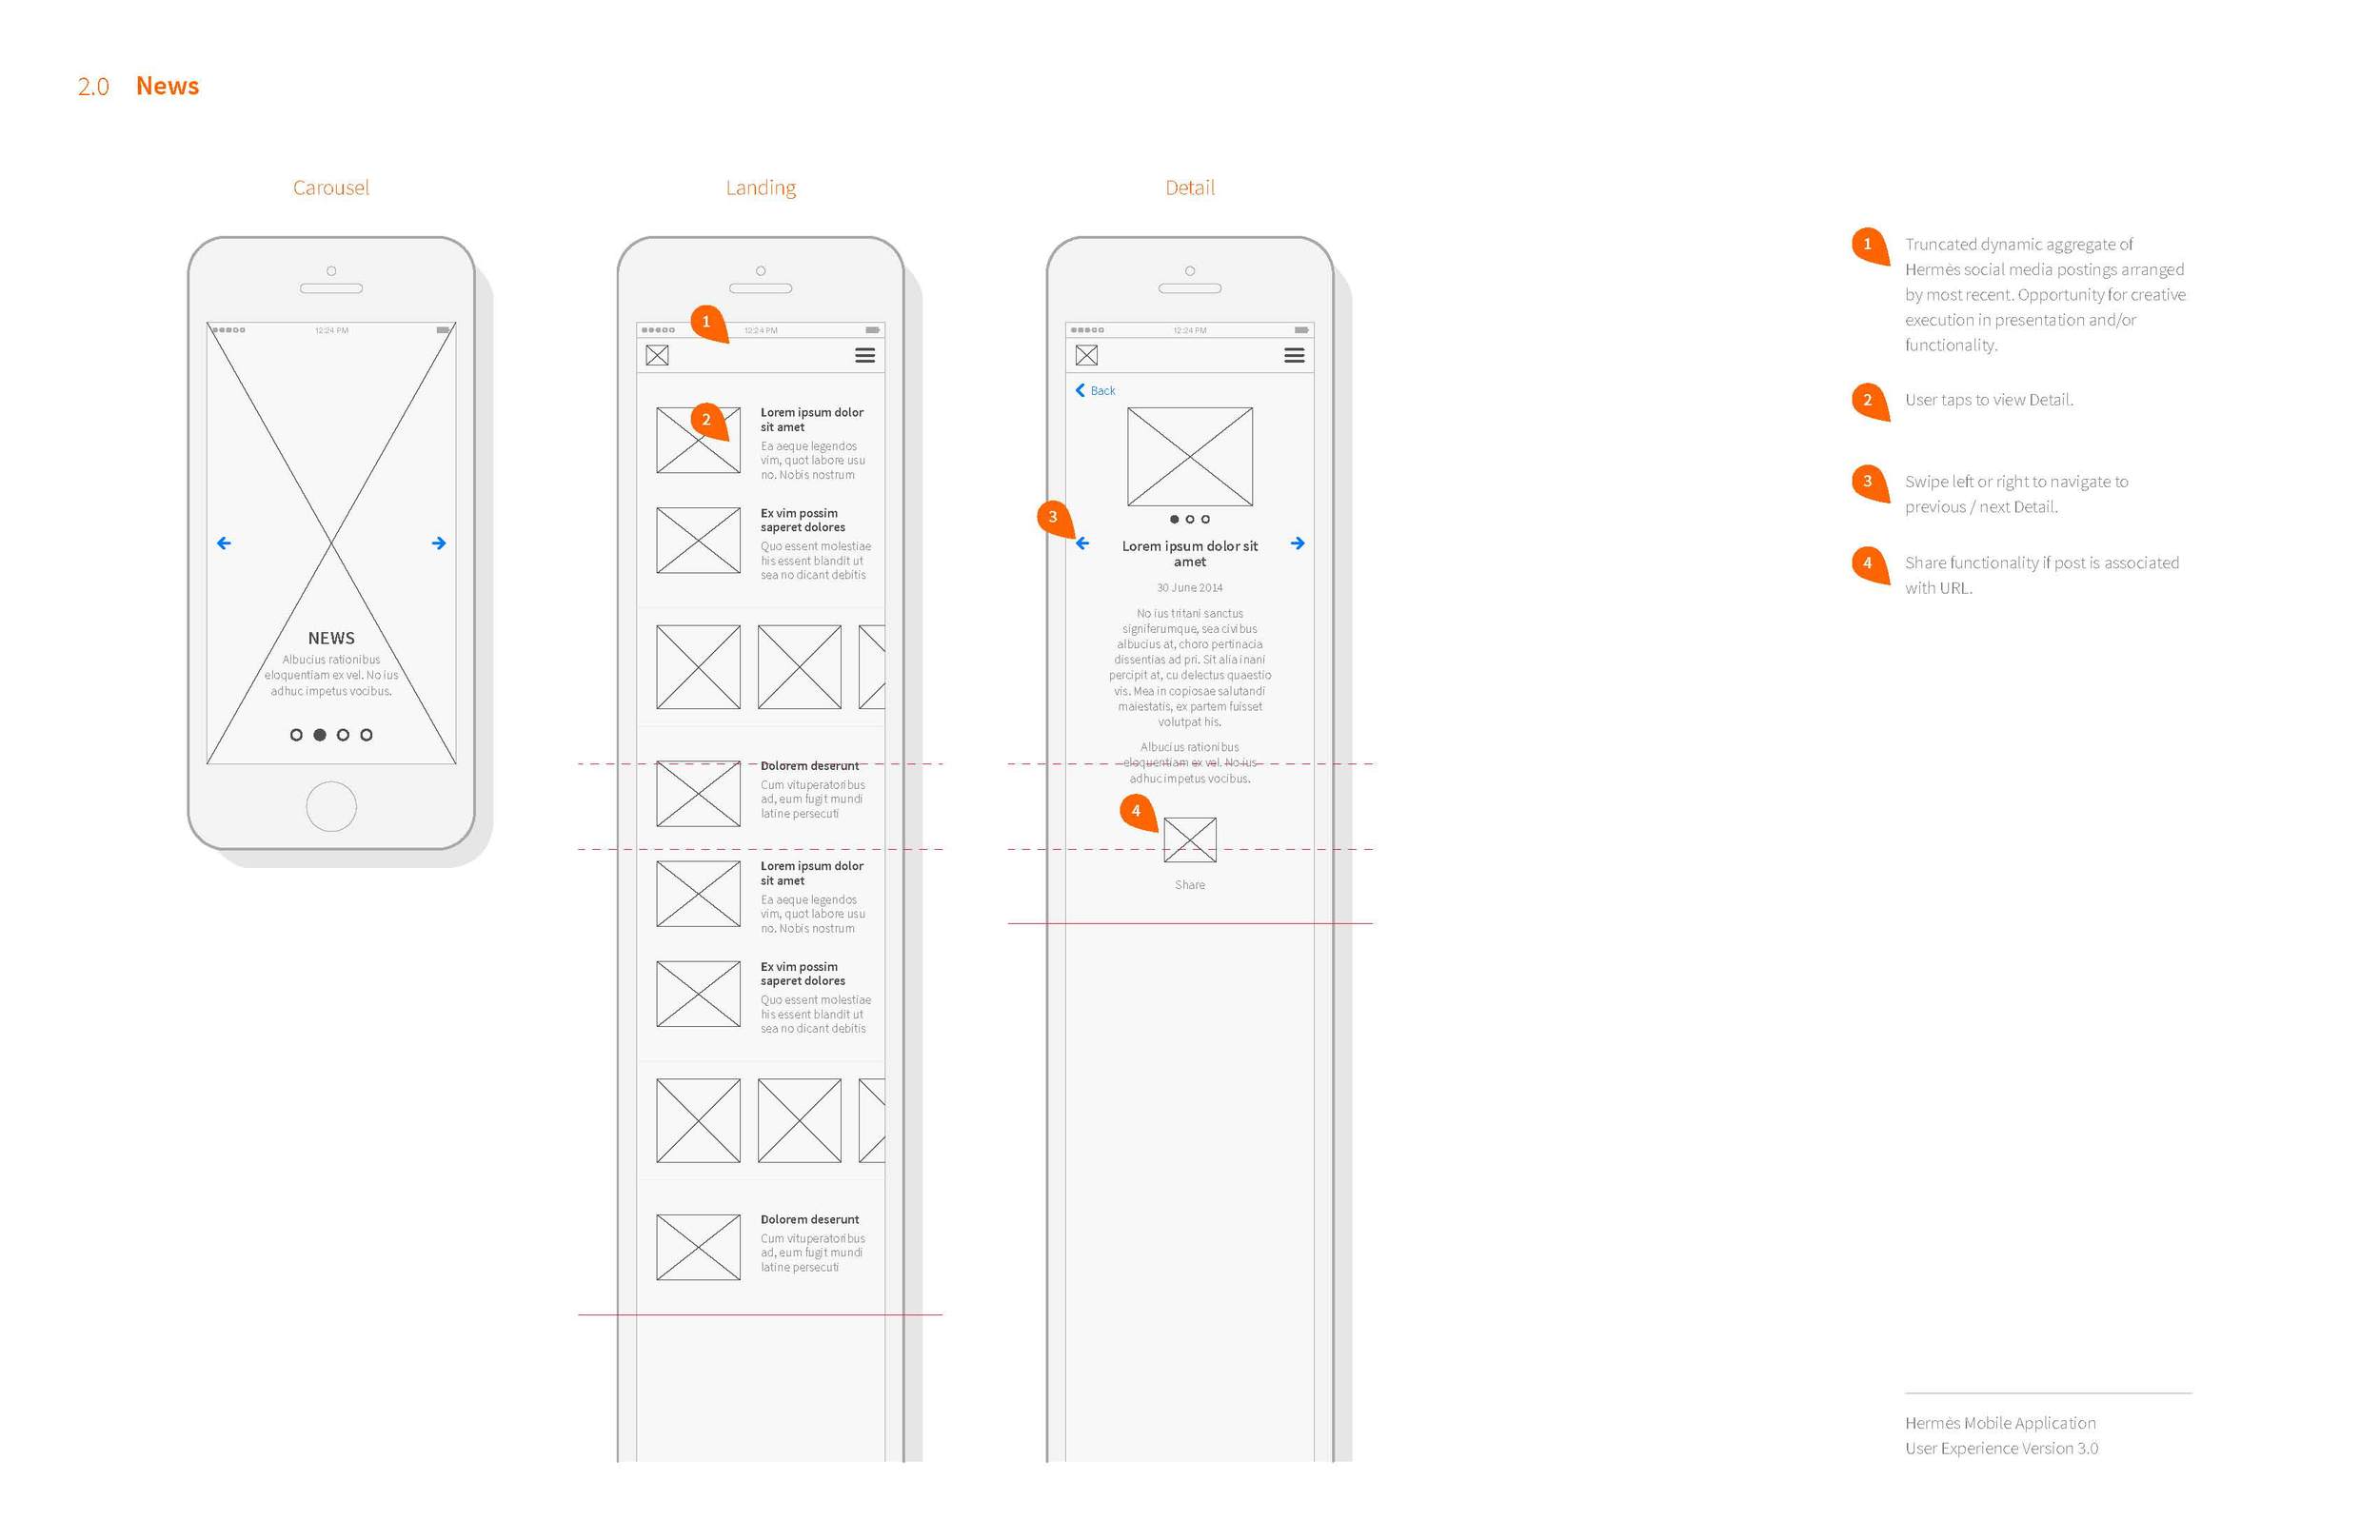 hermes-caraousel-wireframes_Page_09.jpg